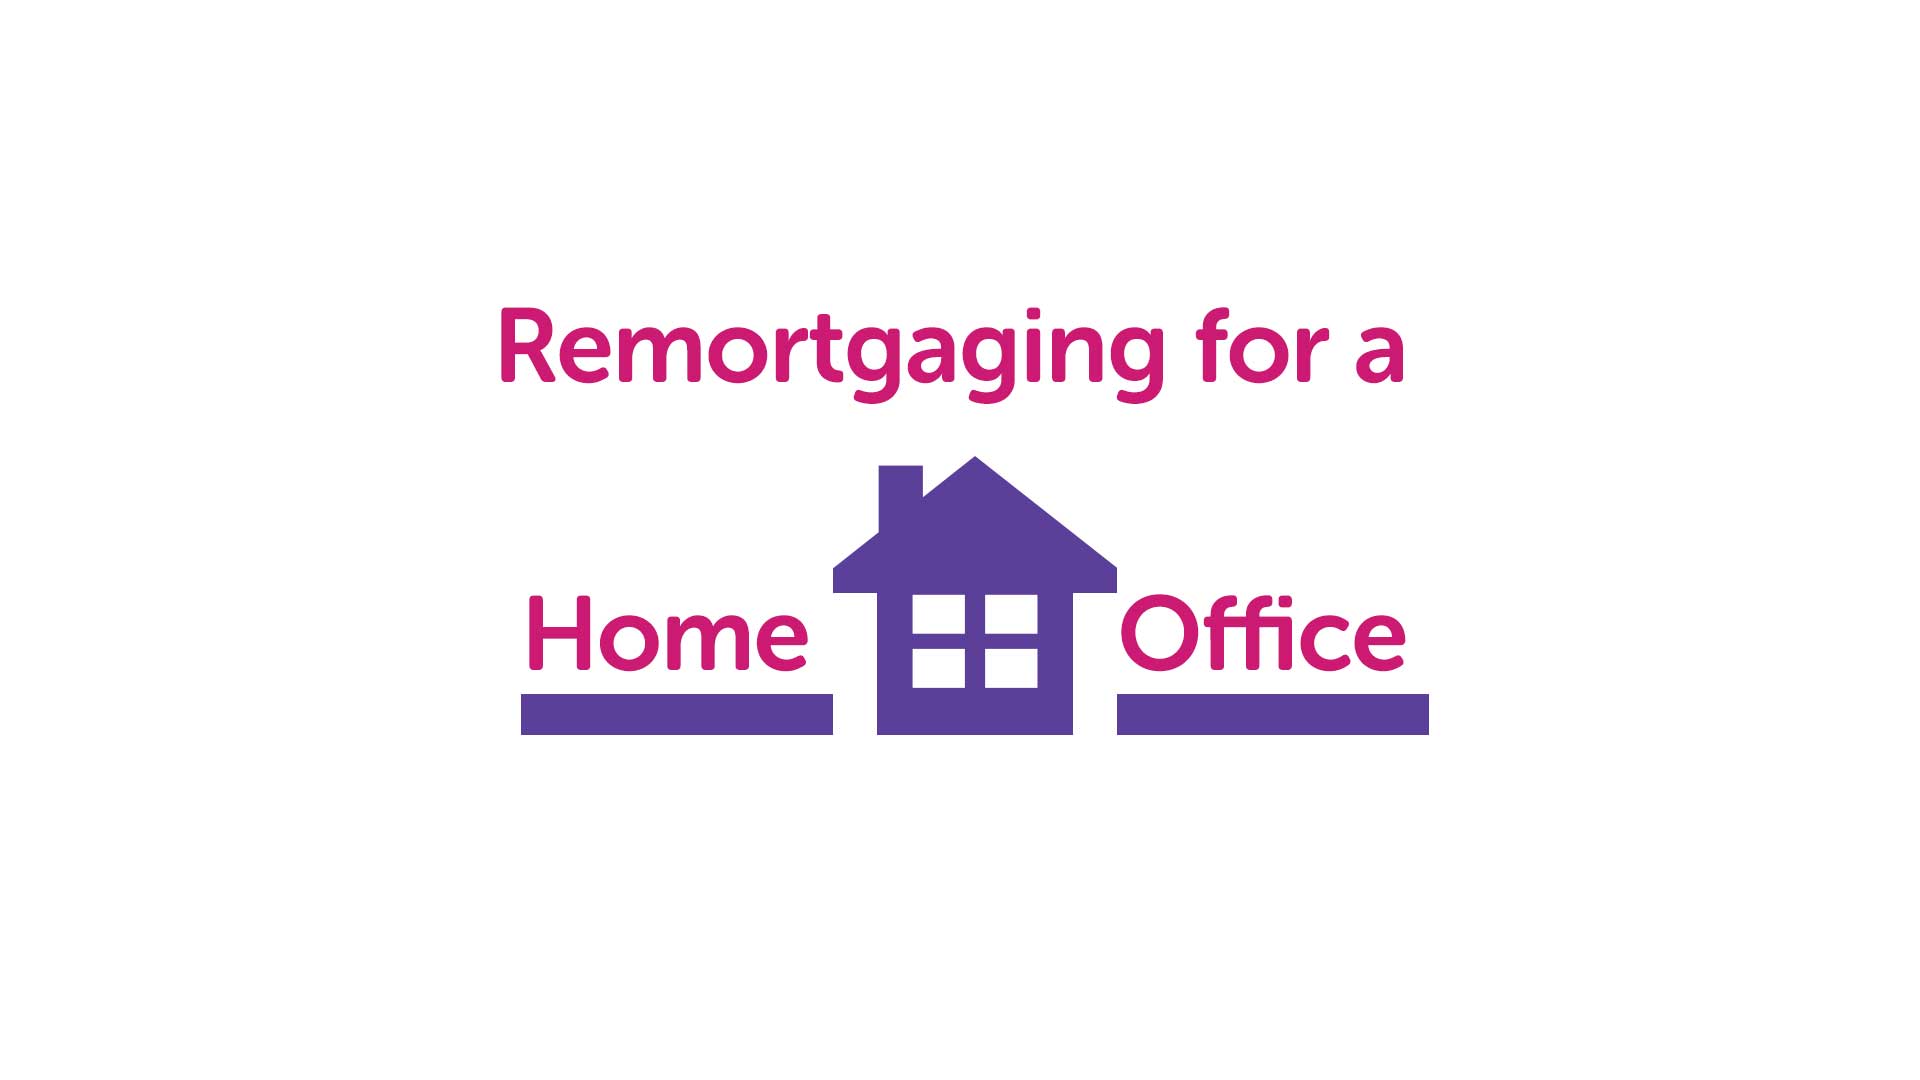 Remortgage for a Home Office in Birmingham